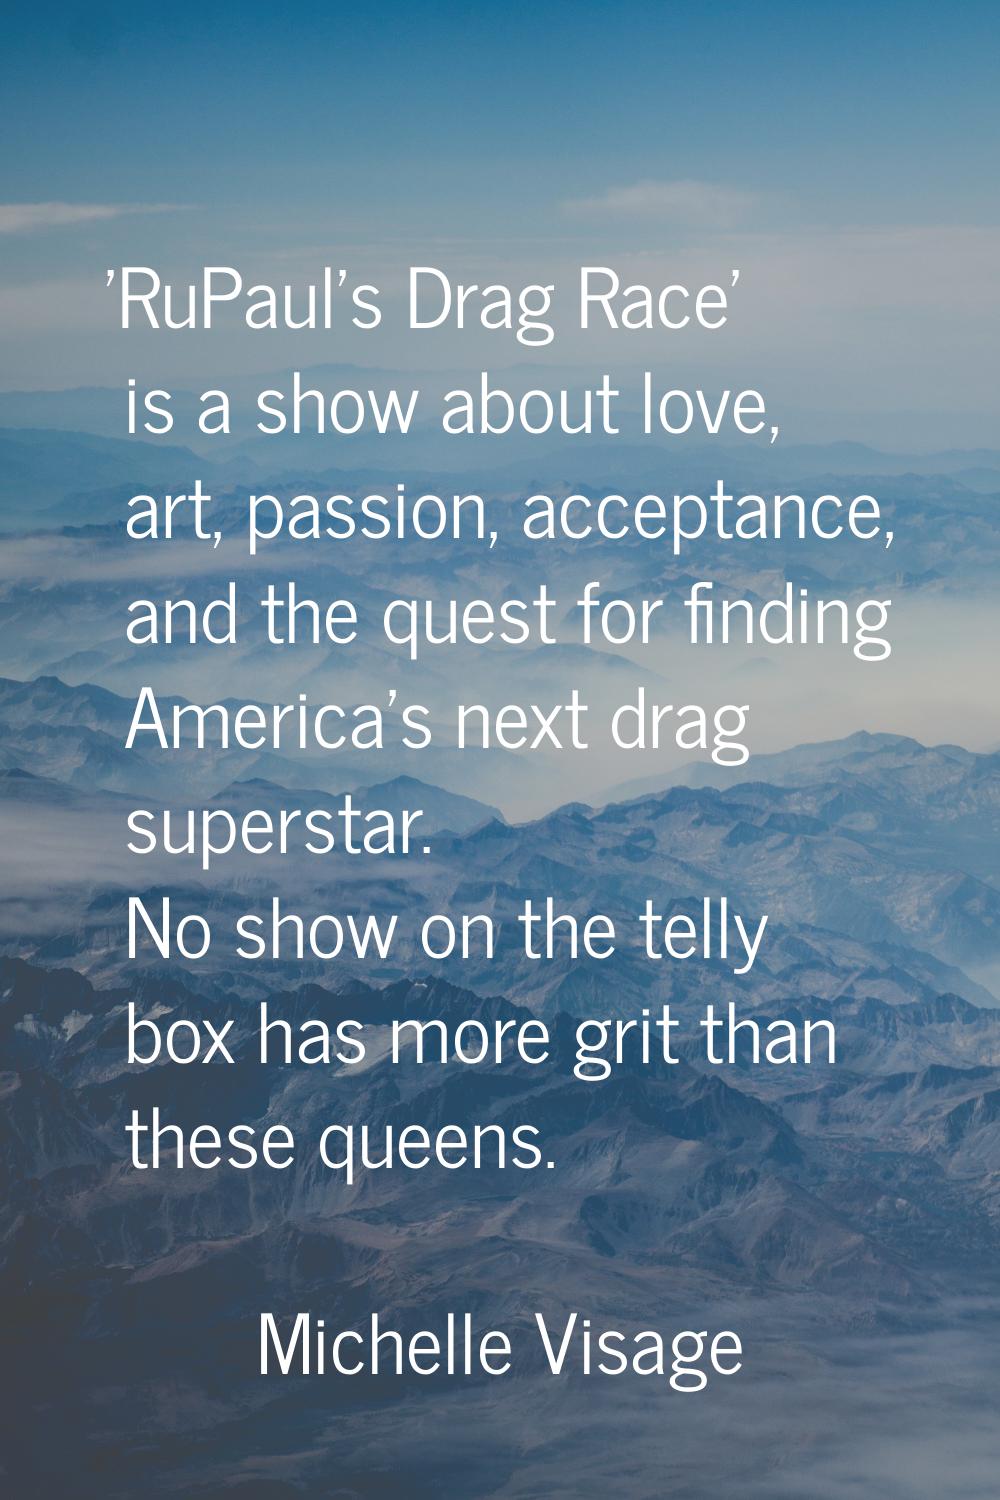 'RuPaul's Drag Race' is a show about love, art, passion, acceptance, and the quest for finding Amer